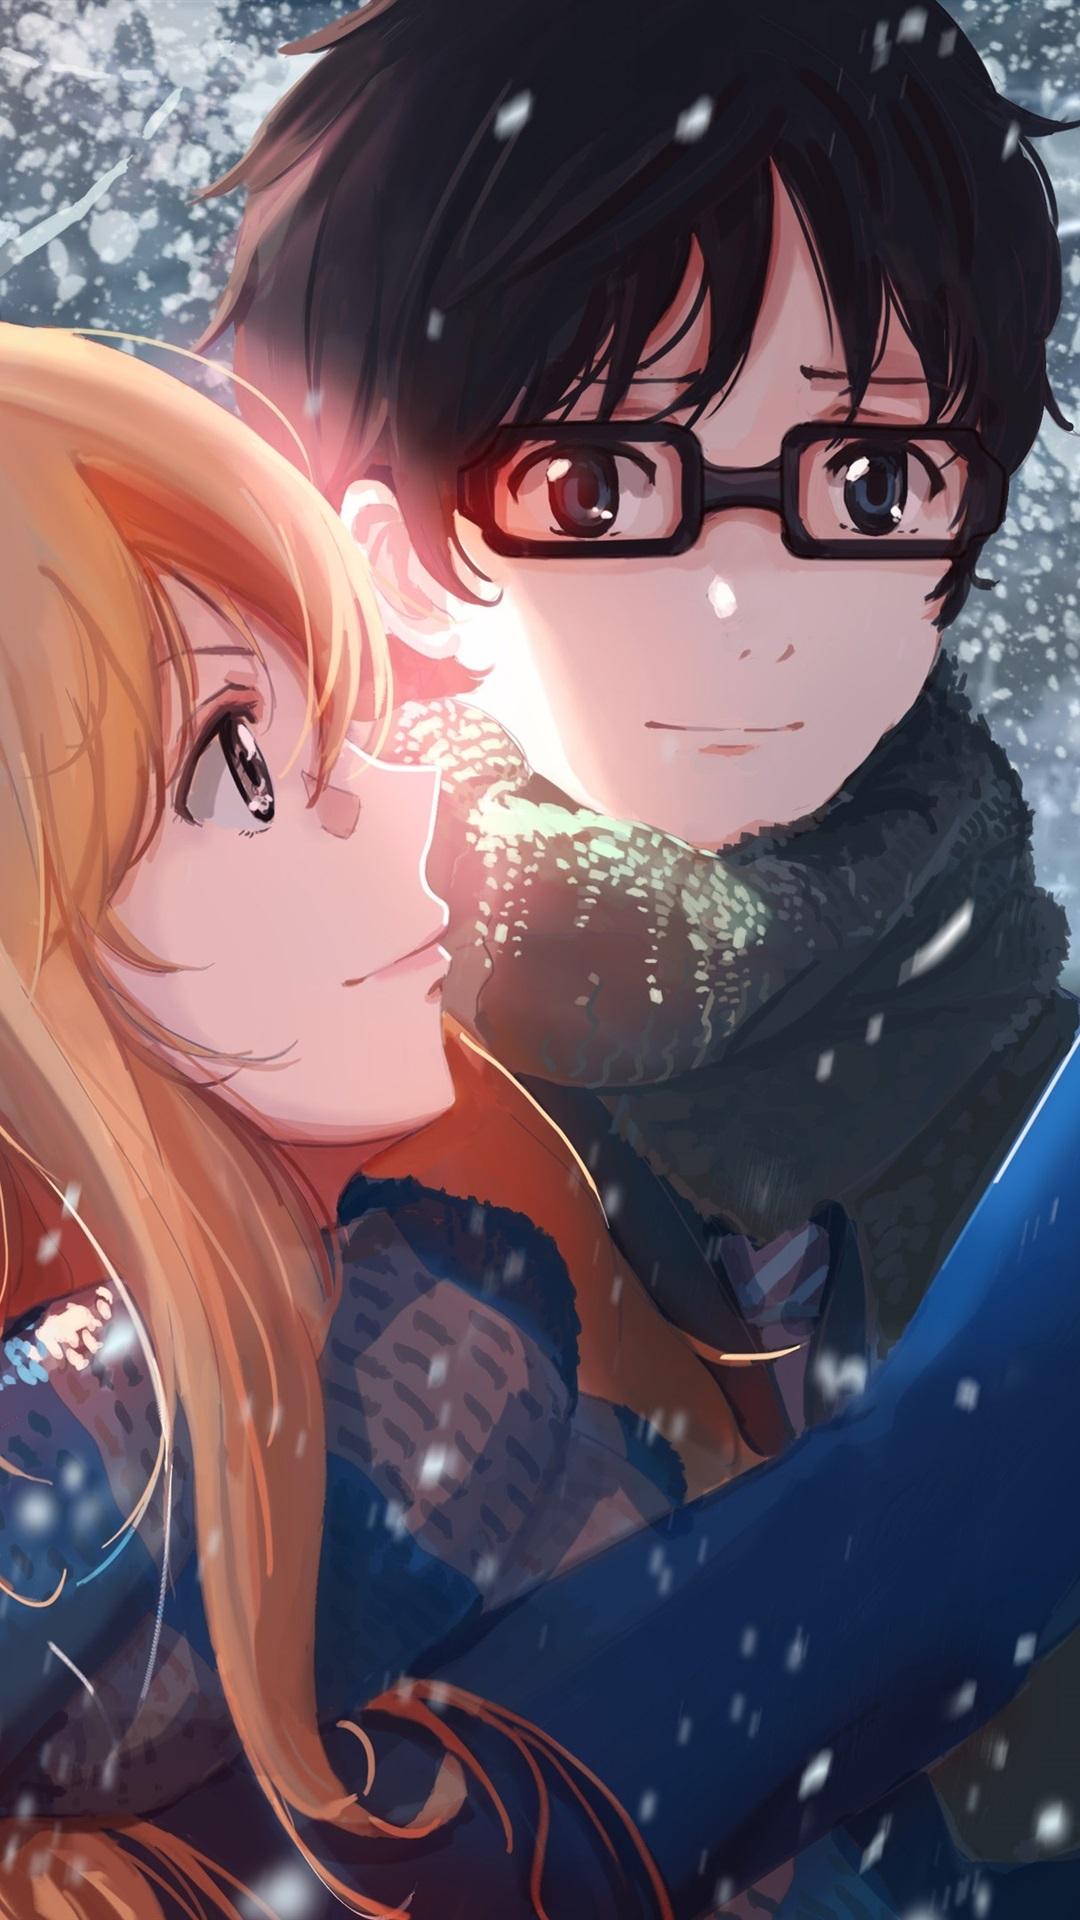 Anime Girl And Boy In Winter, Cat, Snow 1080x1920 IPhone 8 7 6 6S Plus Wallpaper, Background, Picture, Image